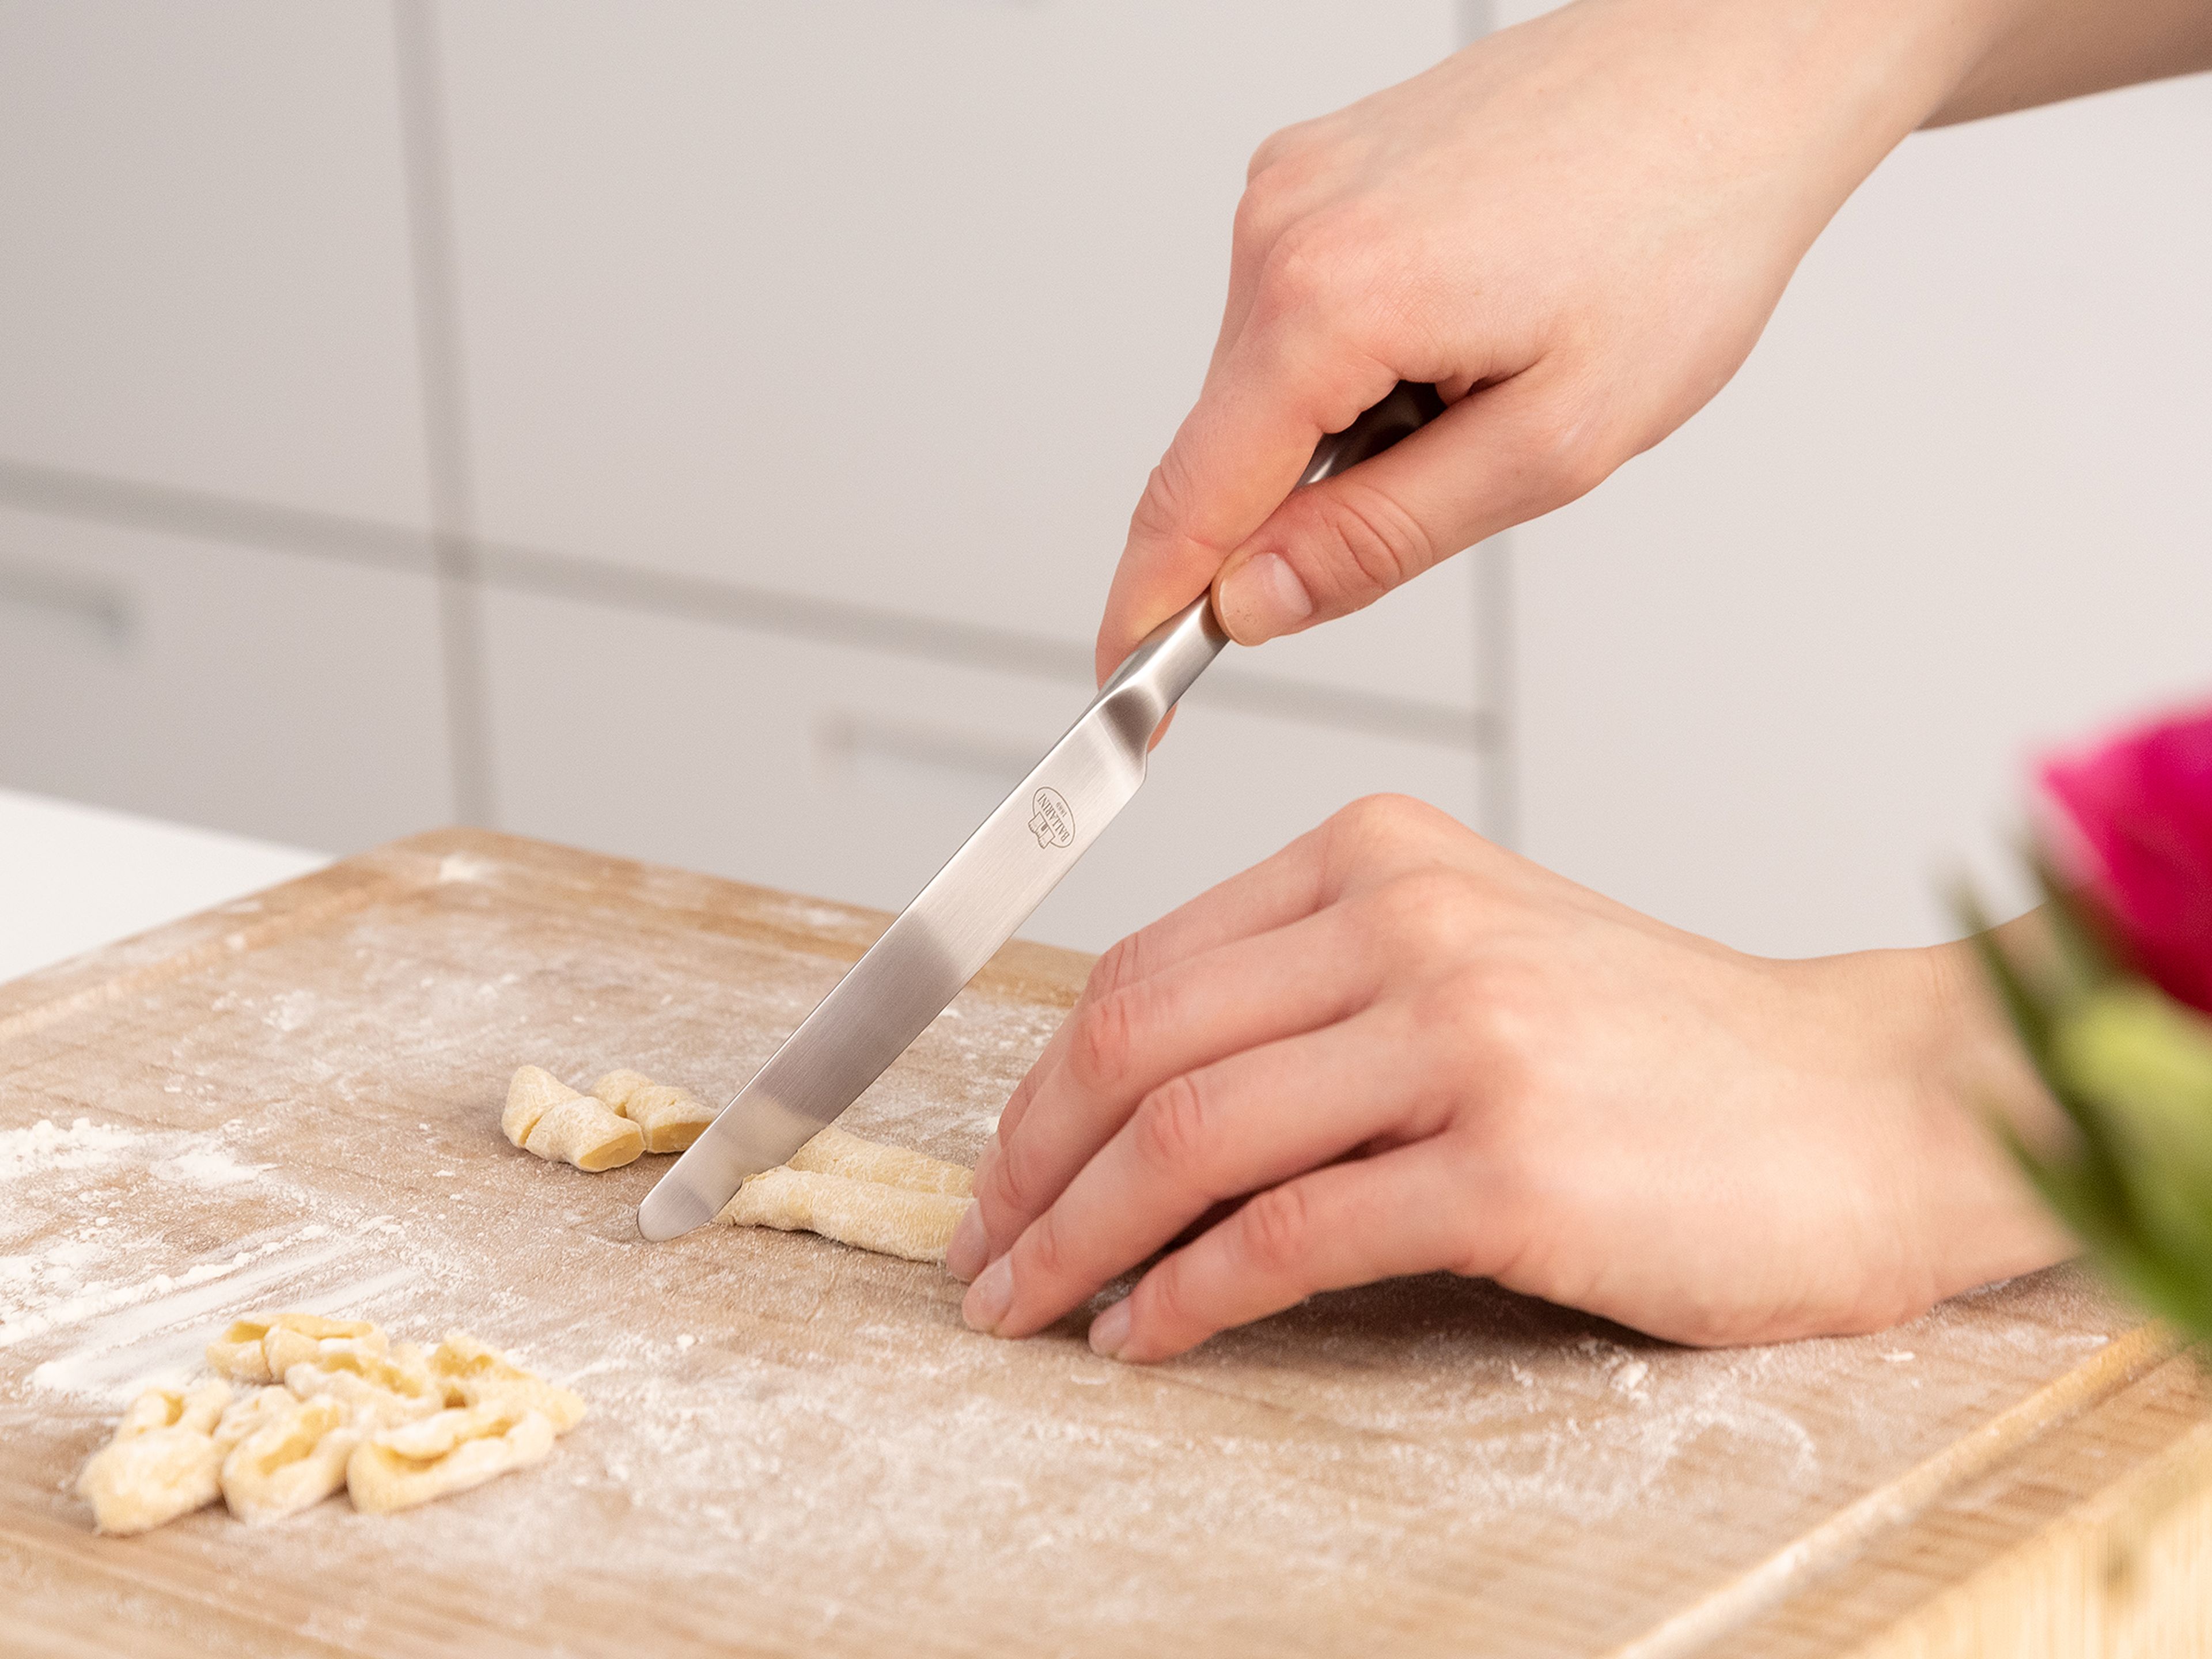 To make cavatelli, roll the pasta dough into thin strands and then cut them into small 1/4-in. (1/2 cm) thick pieces with a pastry cutter or knife. Press each piece in with a fingertip, in order to shape small, round plates.